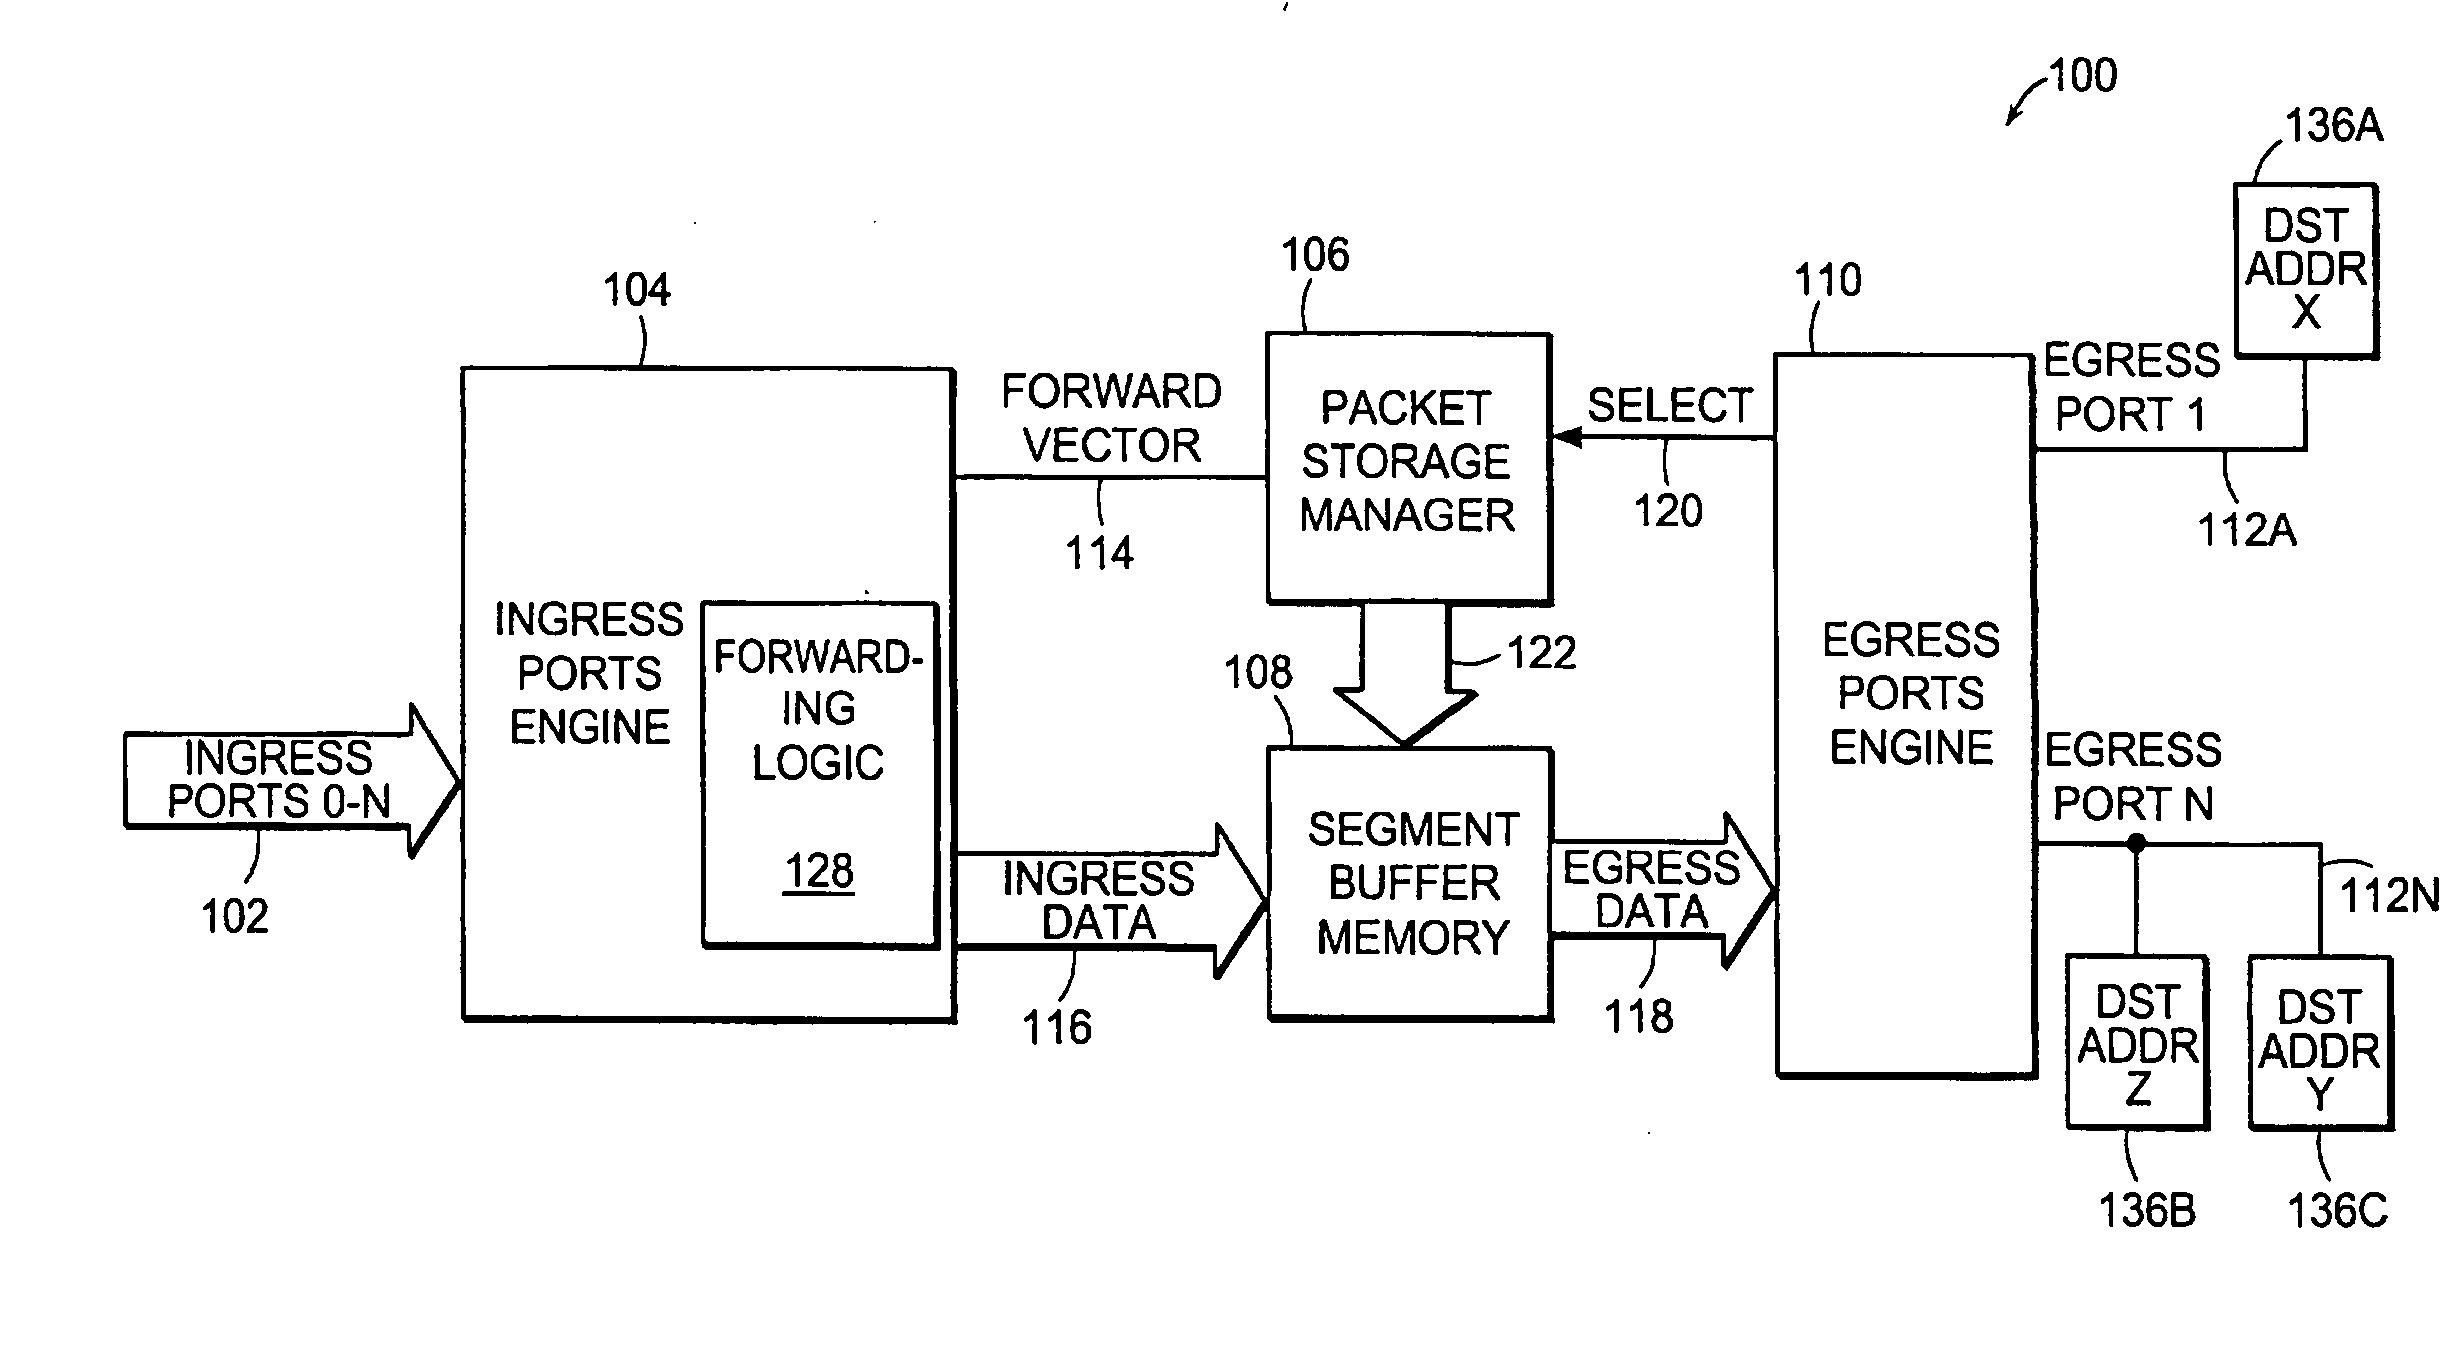 Congestion level management in a network device